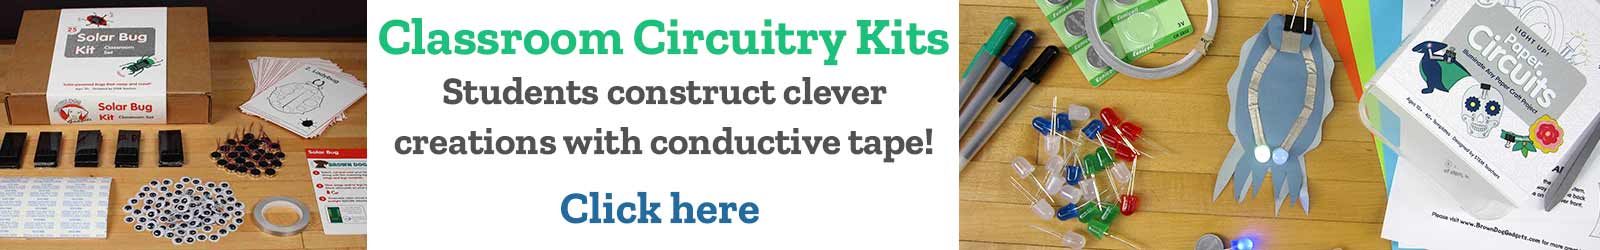 Classroom Circuitry Kits Students construct clever creations with conductive tape!